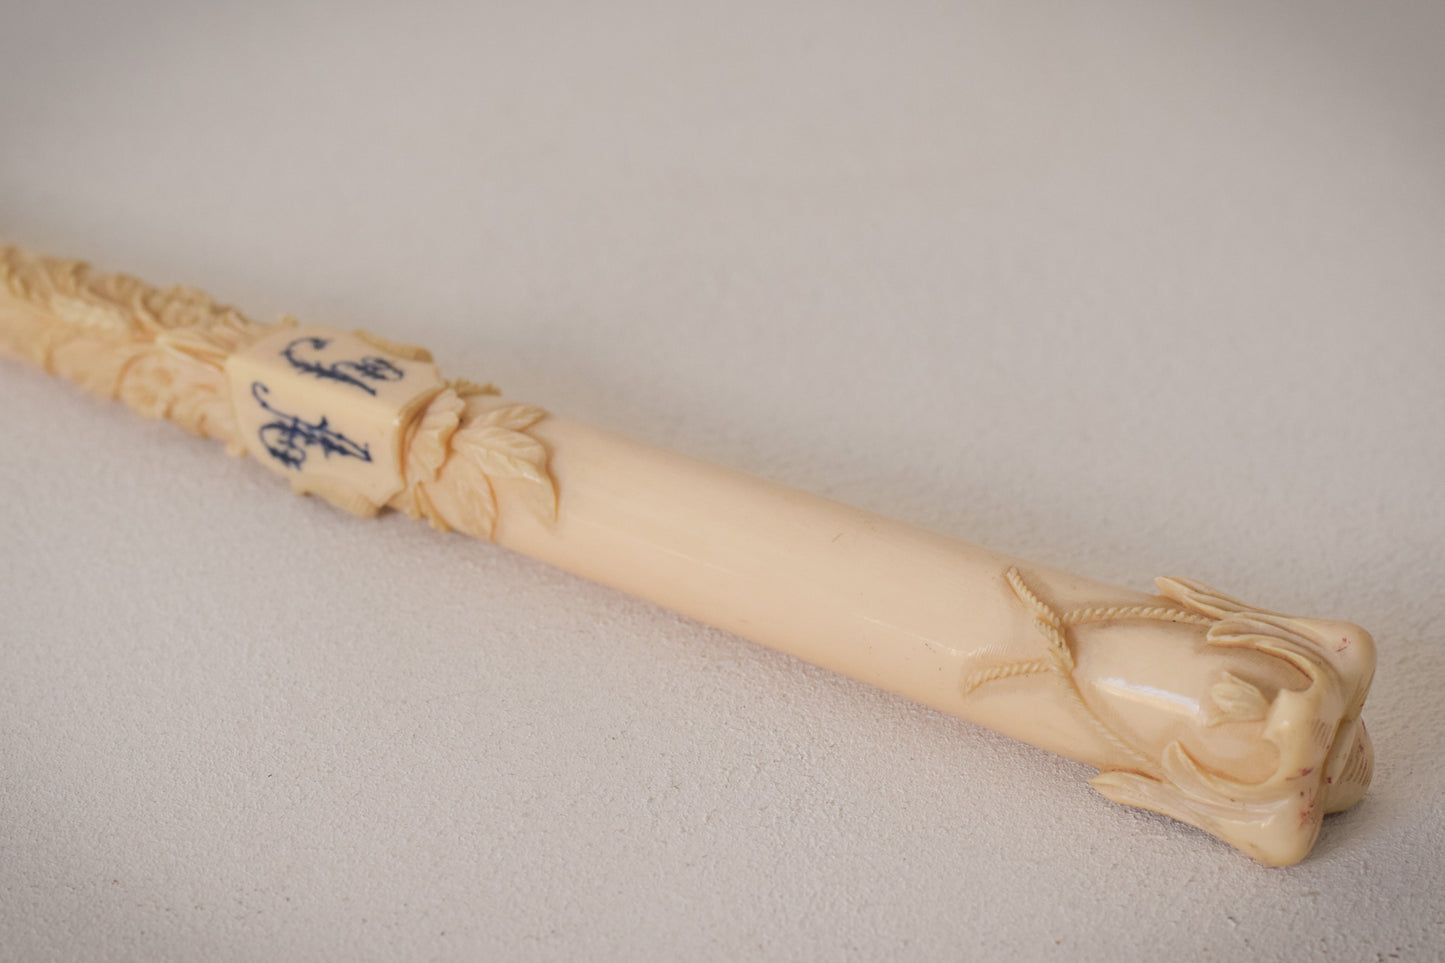 Beautifully Carved Ivory Parasol with Exquisite Lacework